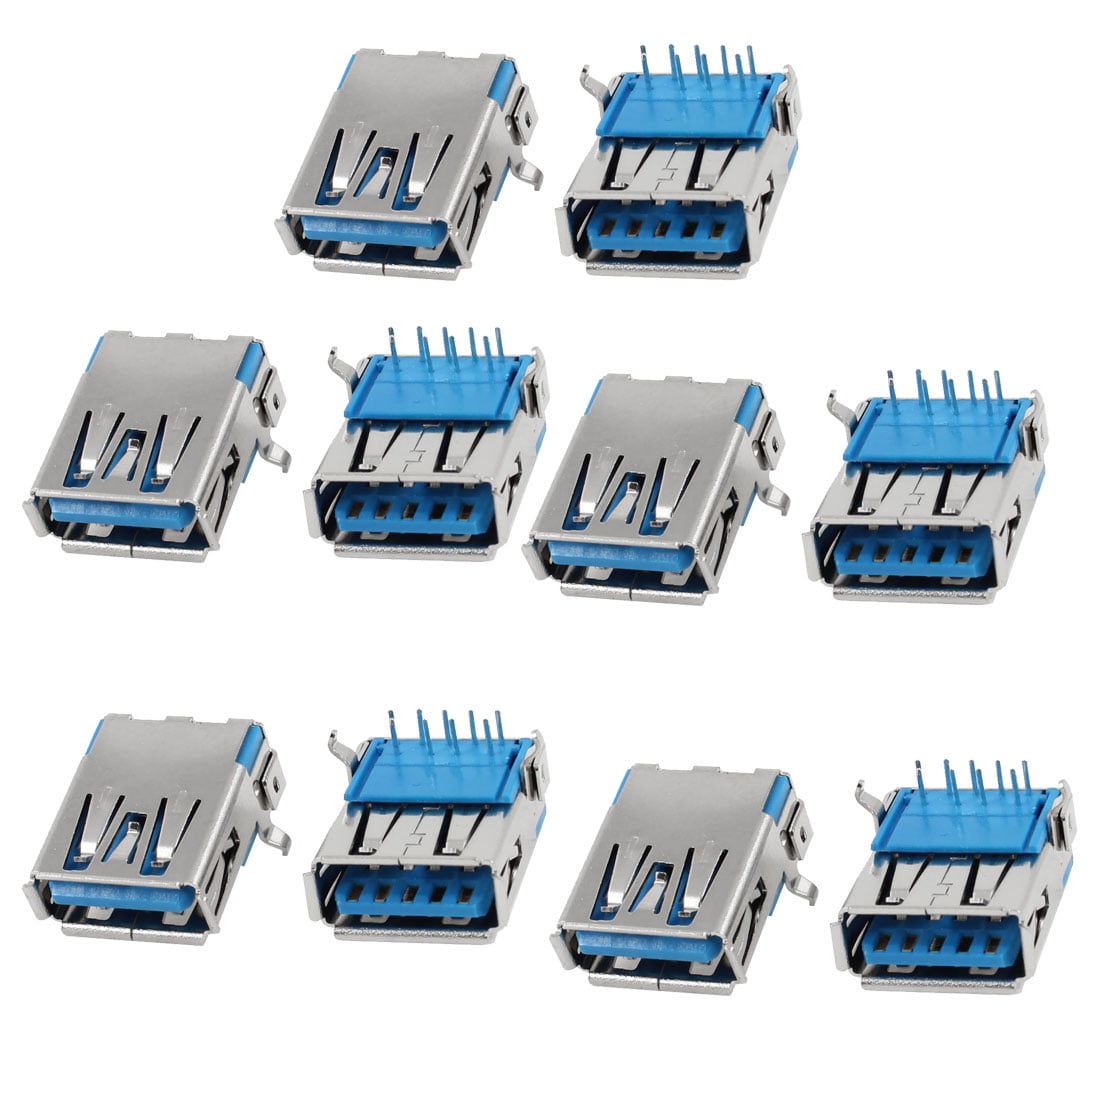 10Pcs USB 3.0 Type A 9Pin Right Angle DIP Female Socket PCB Solder Connector